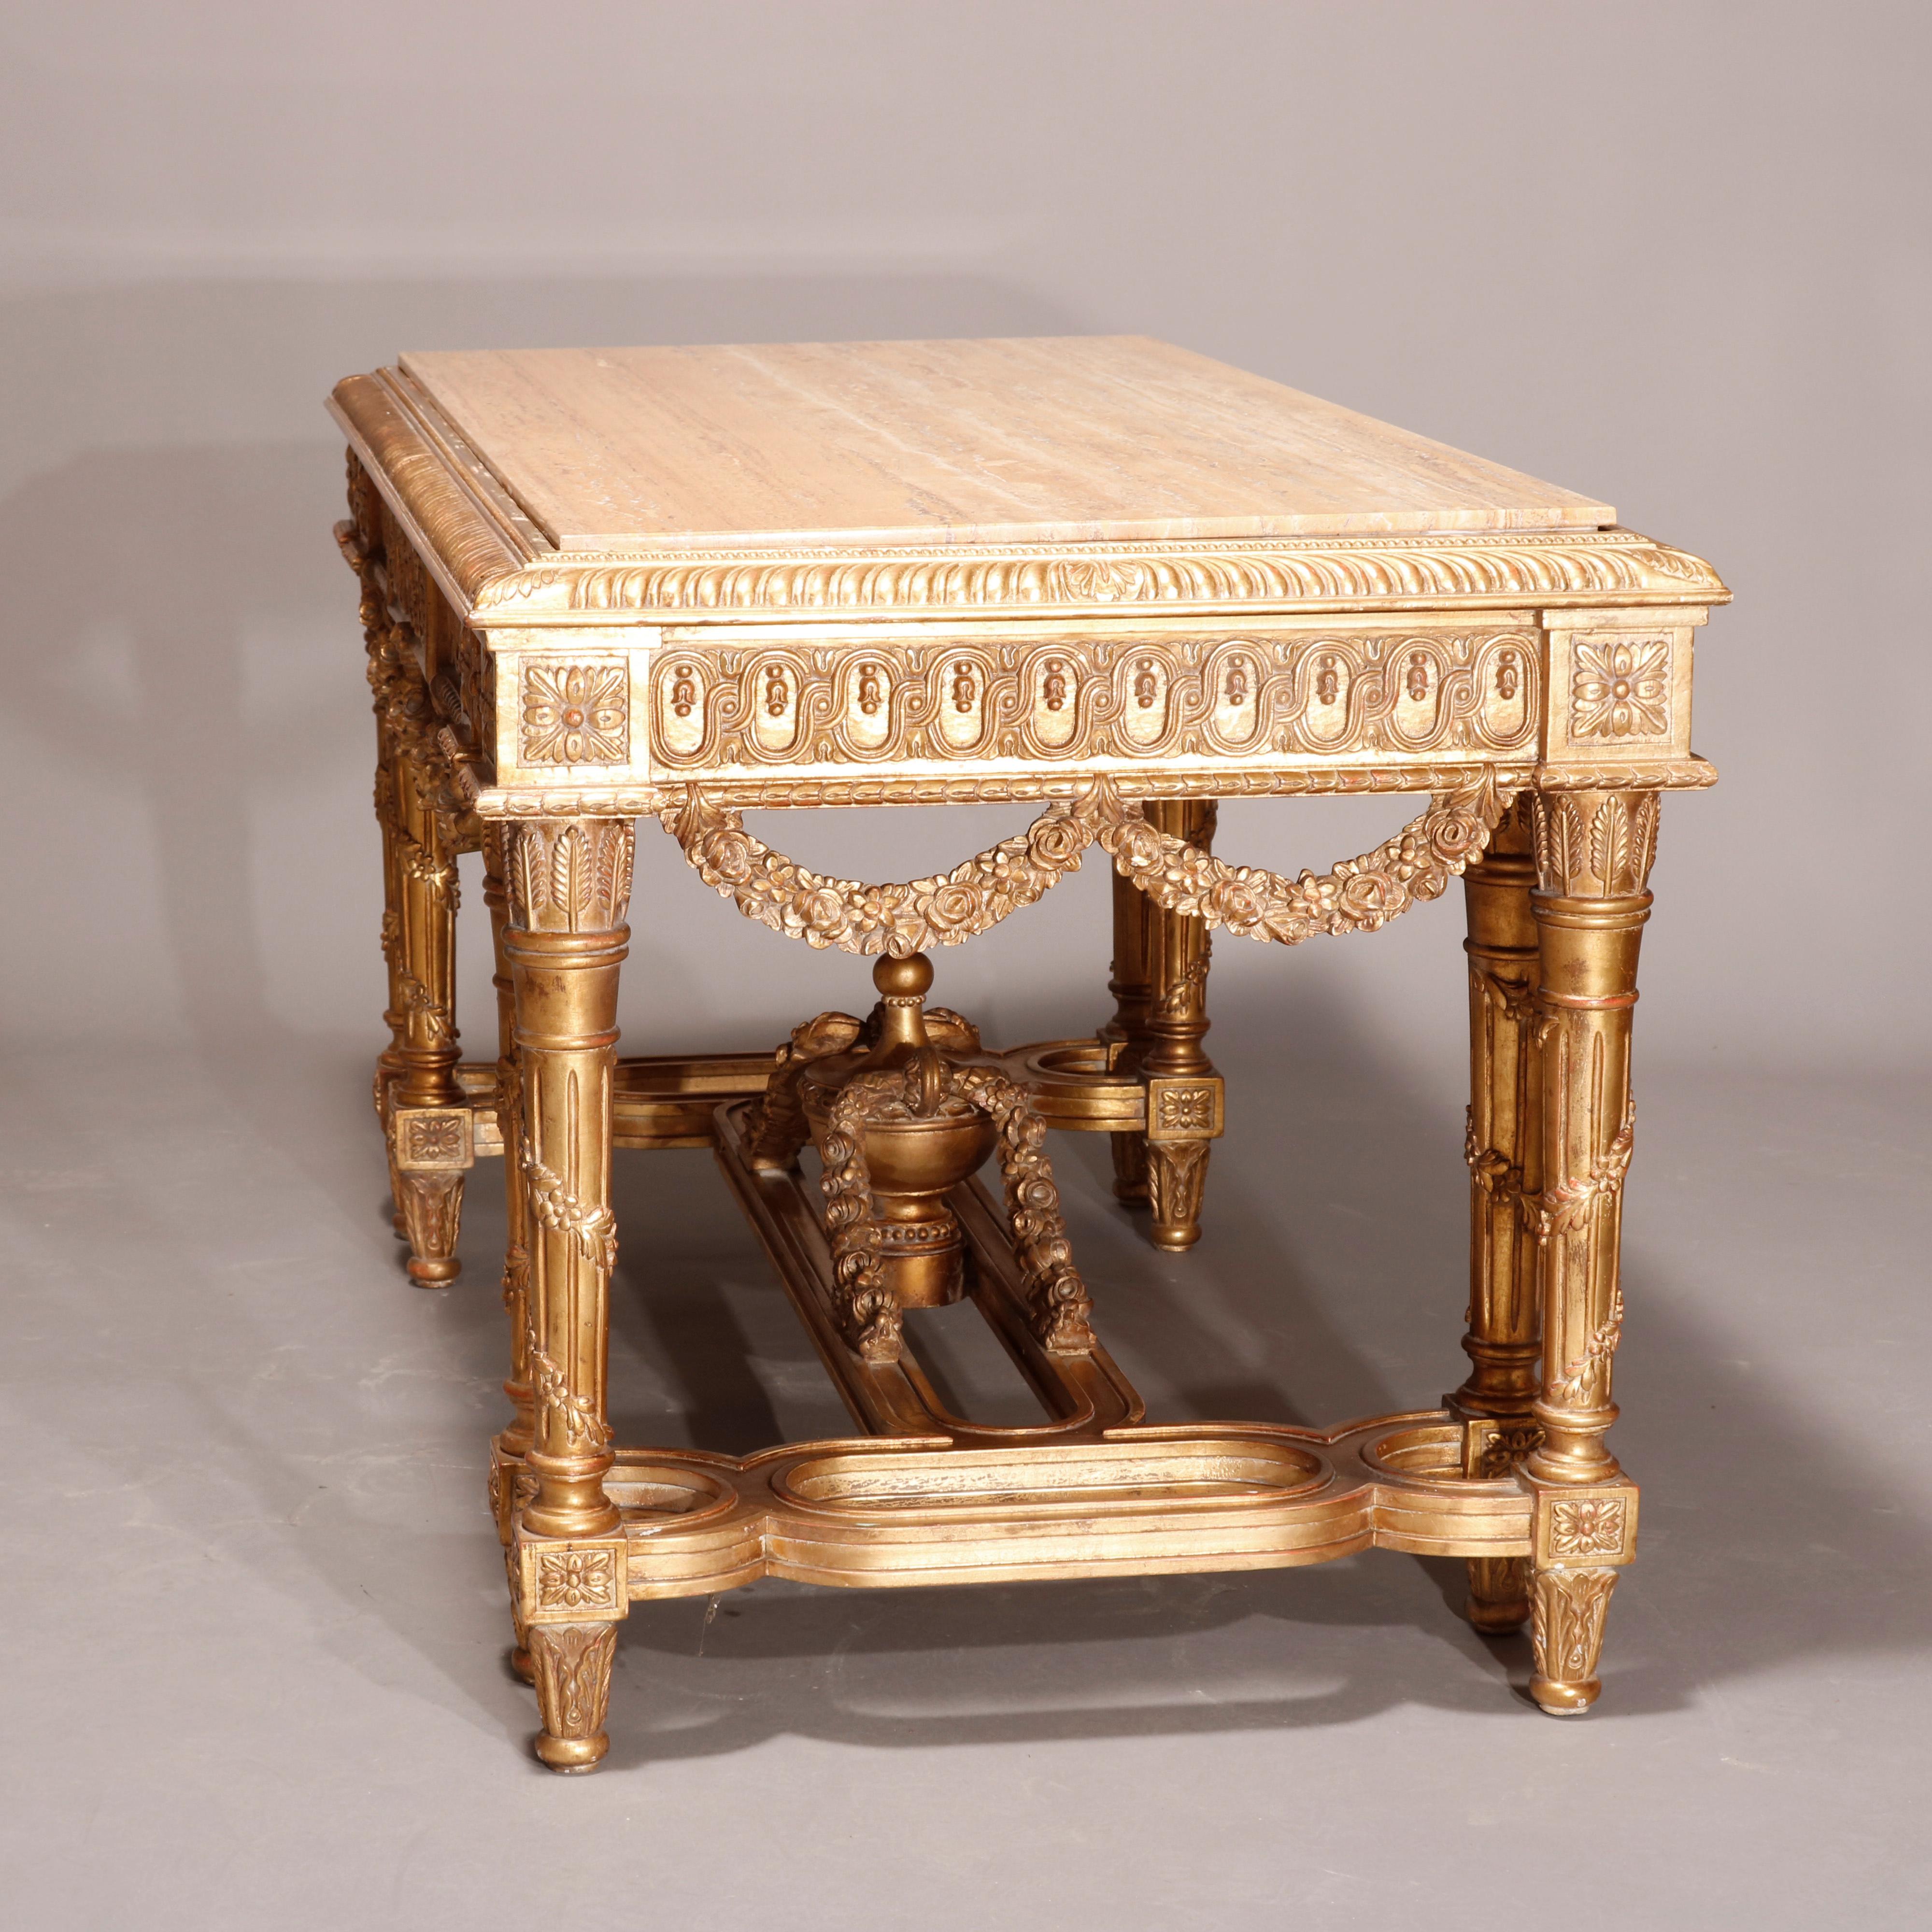 An antique monumental French Empire style parlor table offers marble top surmounting highly ornate giltwood base having gadroon trimming over decorated skirt having floral garland swags, rosettes, and raised on reeded and tapered double legs having